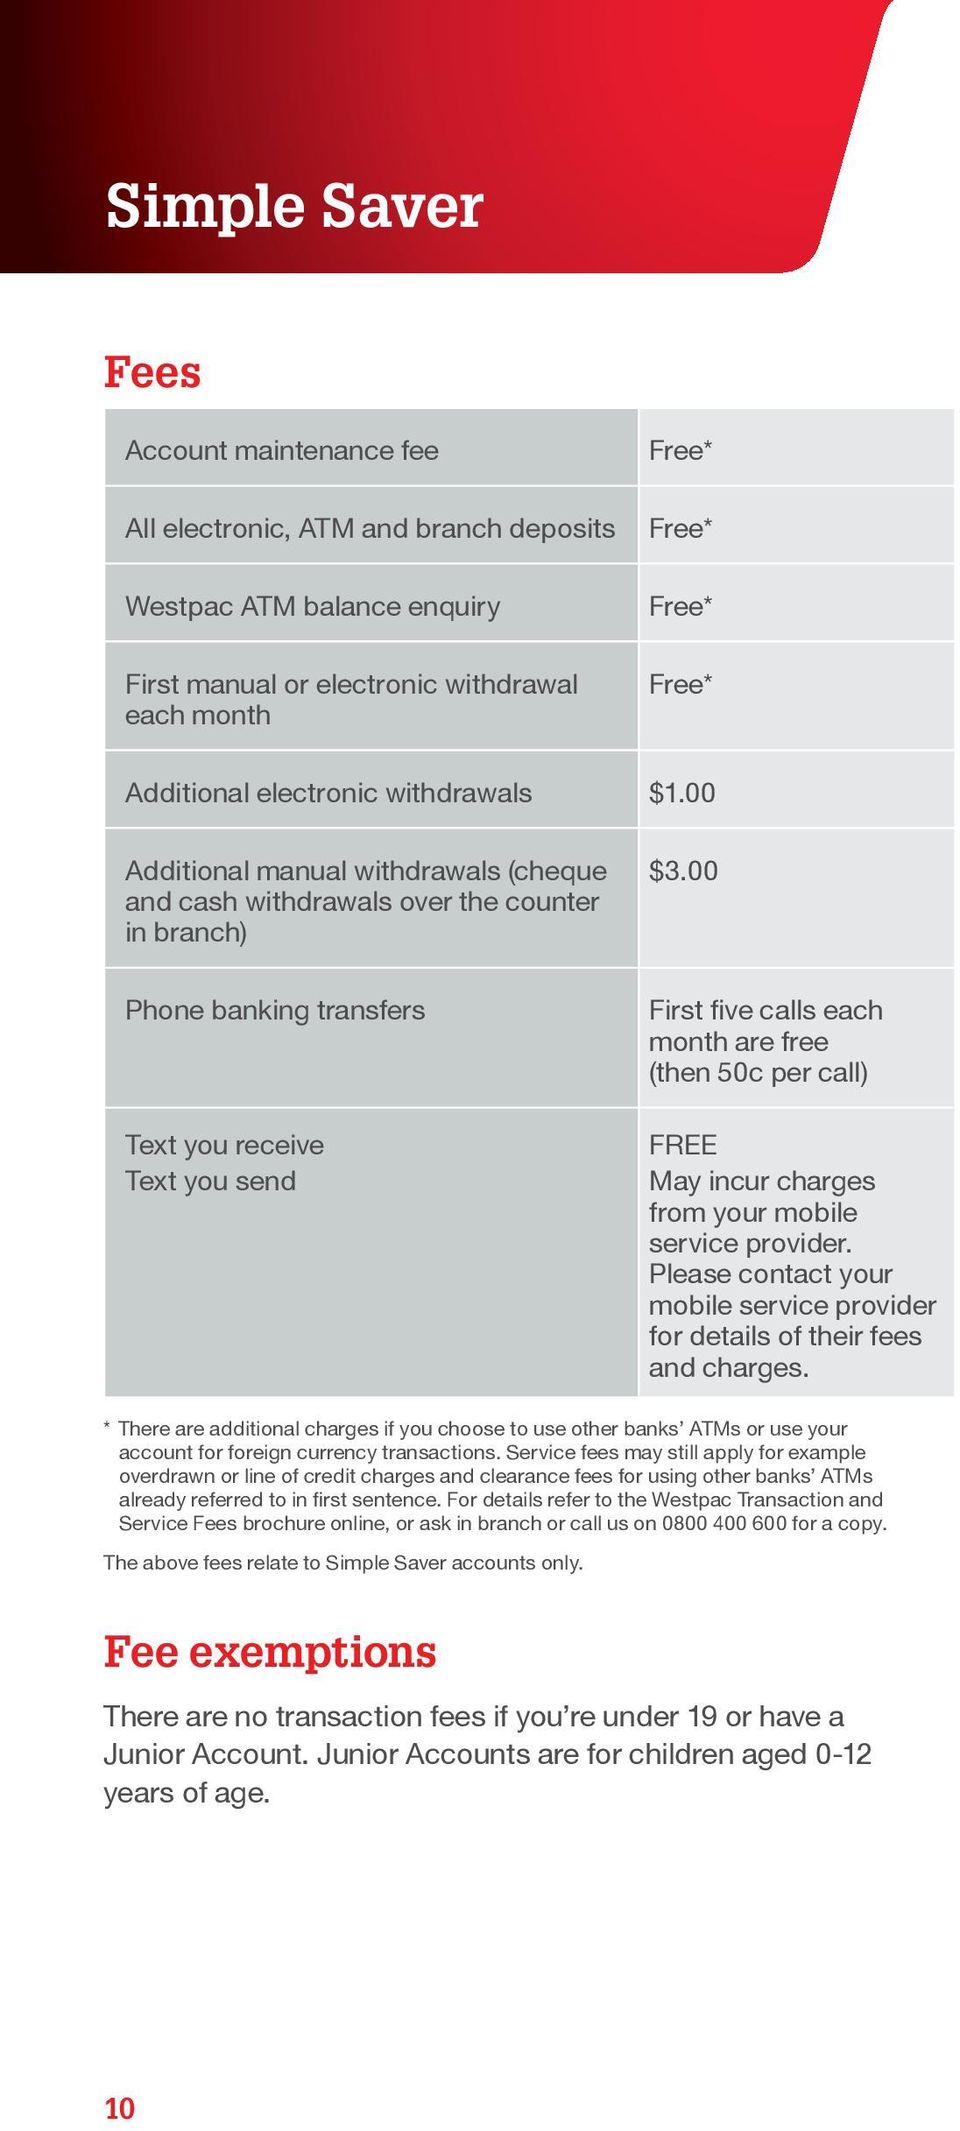 00 First five calls each month are free (then 50c per call) FREE May incur charges from your mobile service provider. Please contact your mobile service provider for details of their fees and charges.